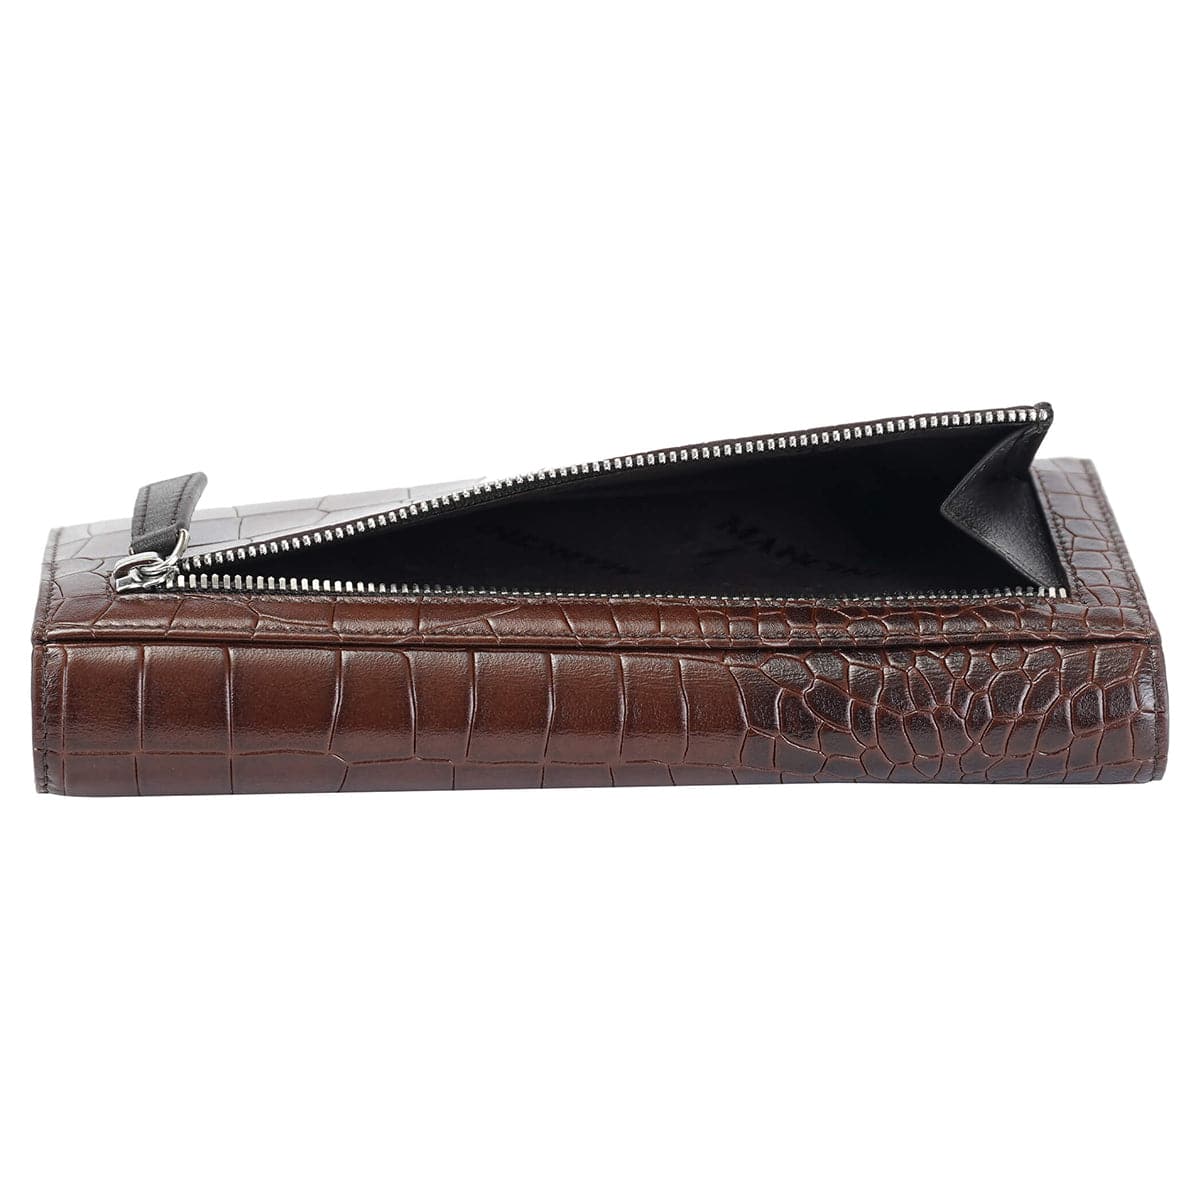 Mancini Croco2 Women’s Trifold Wallet with Enhanced RFID Security